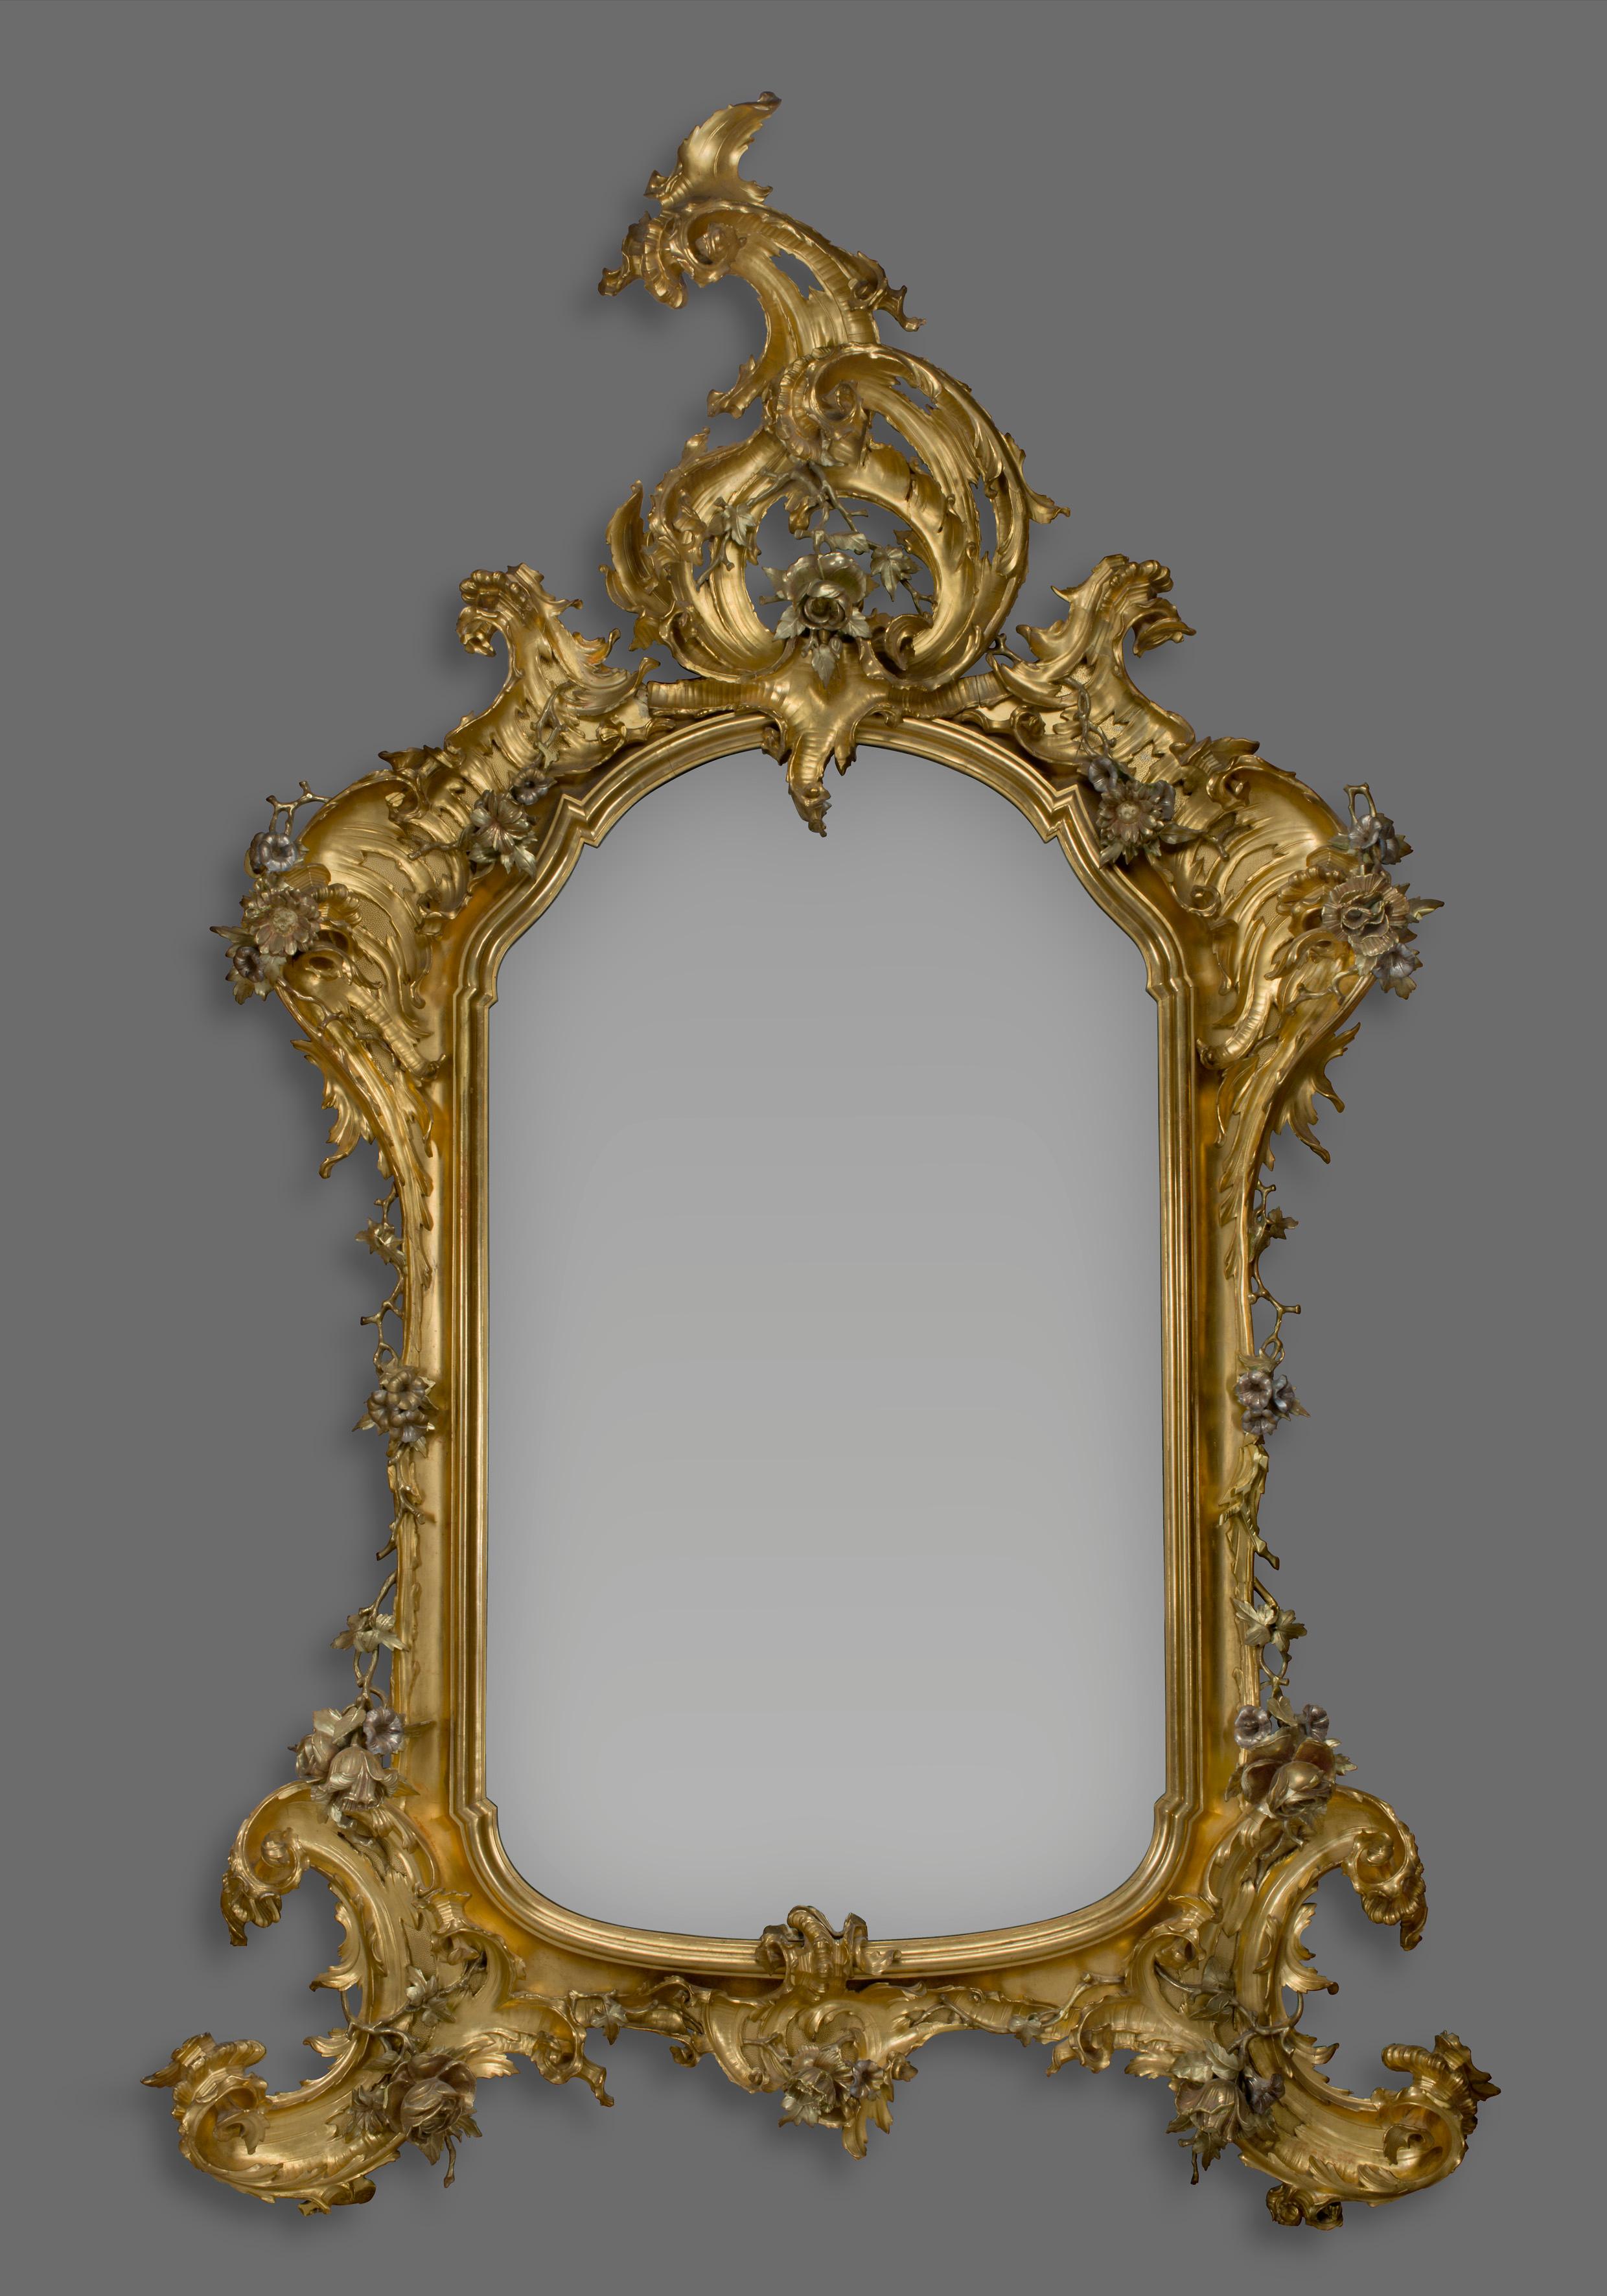 A large Rococo style carved giltwood and silver gilt mirror.

Possibly German, circa 1870. 

The arched mirror plate within a moulded re-entrant inner frame, flanked by an outer frame with exuberant 'C' - scrolls and fronded acanthus to the